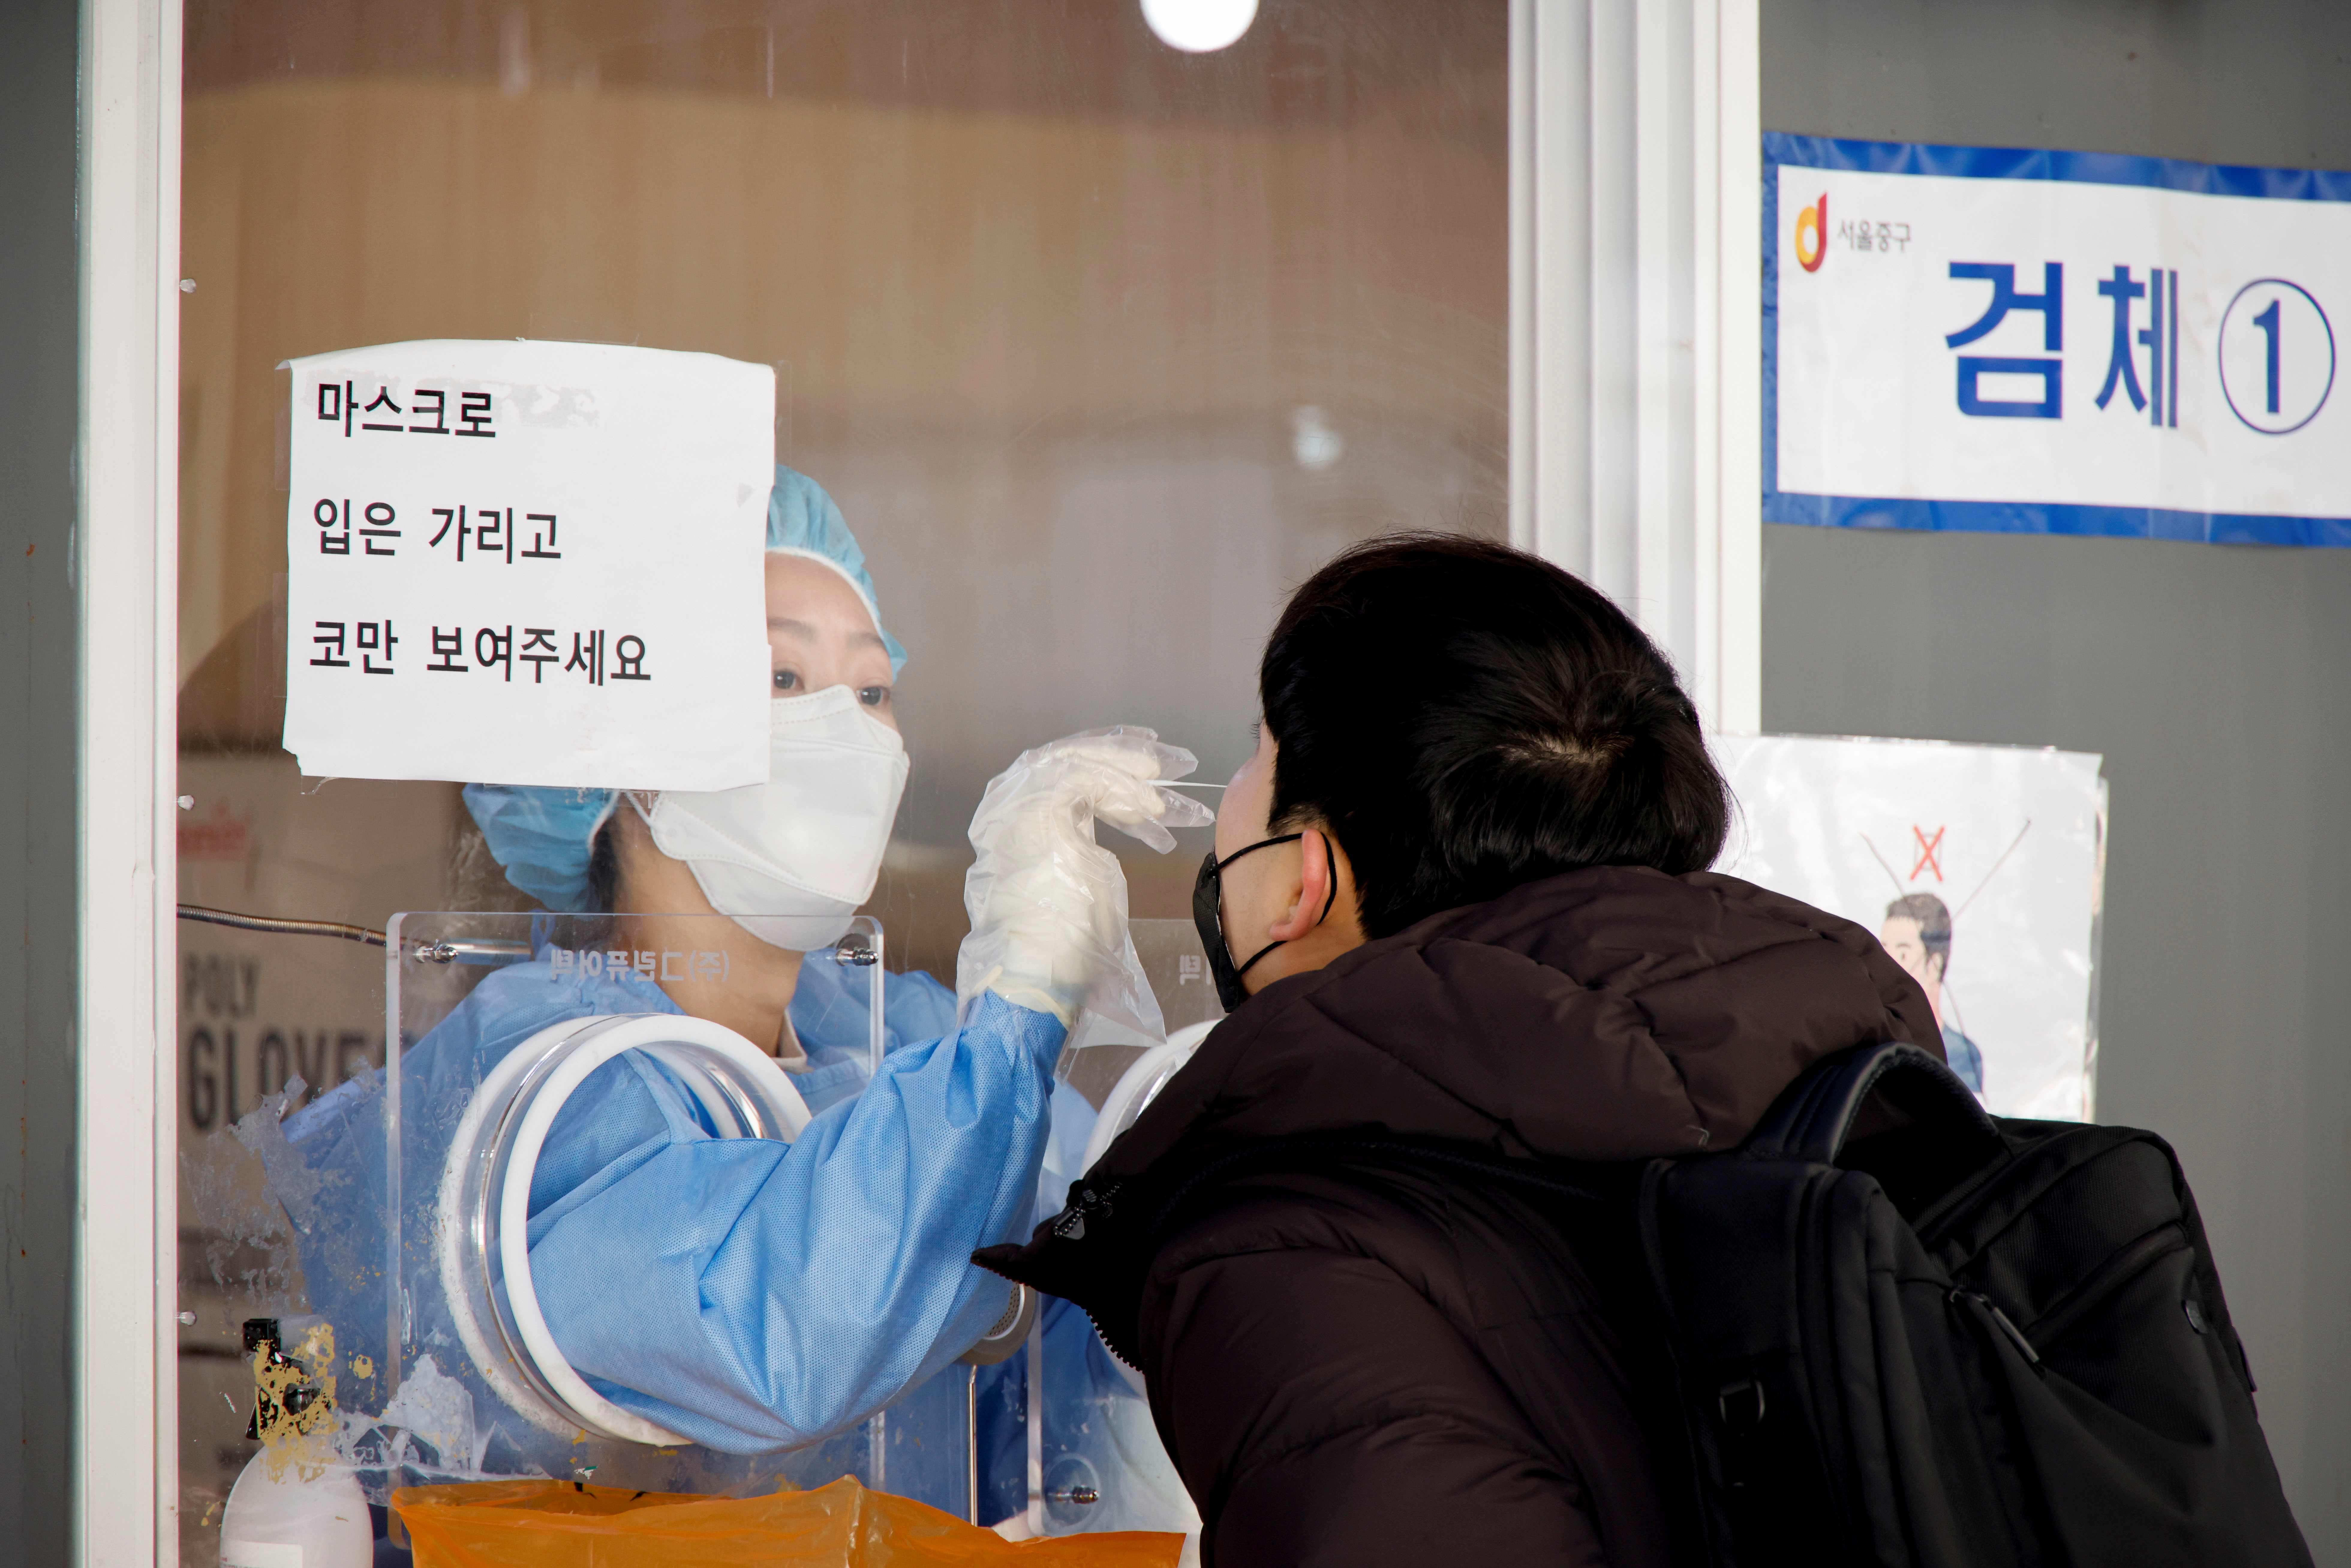 Coronavirus disease (COVID-19) temporary testing site set up at a railway station in Seoul